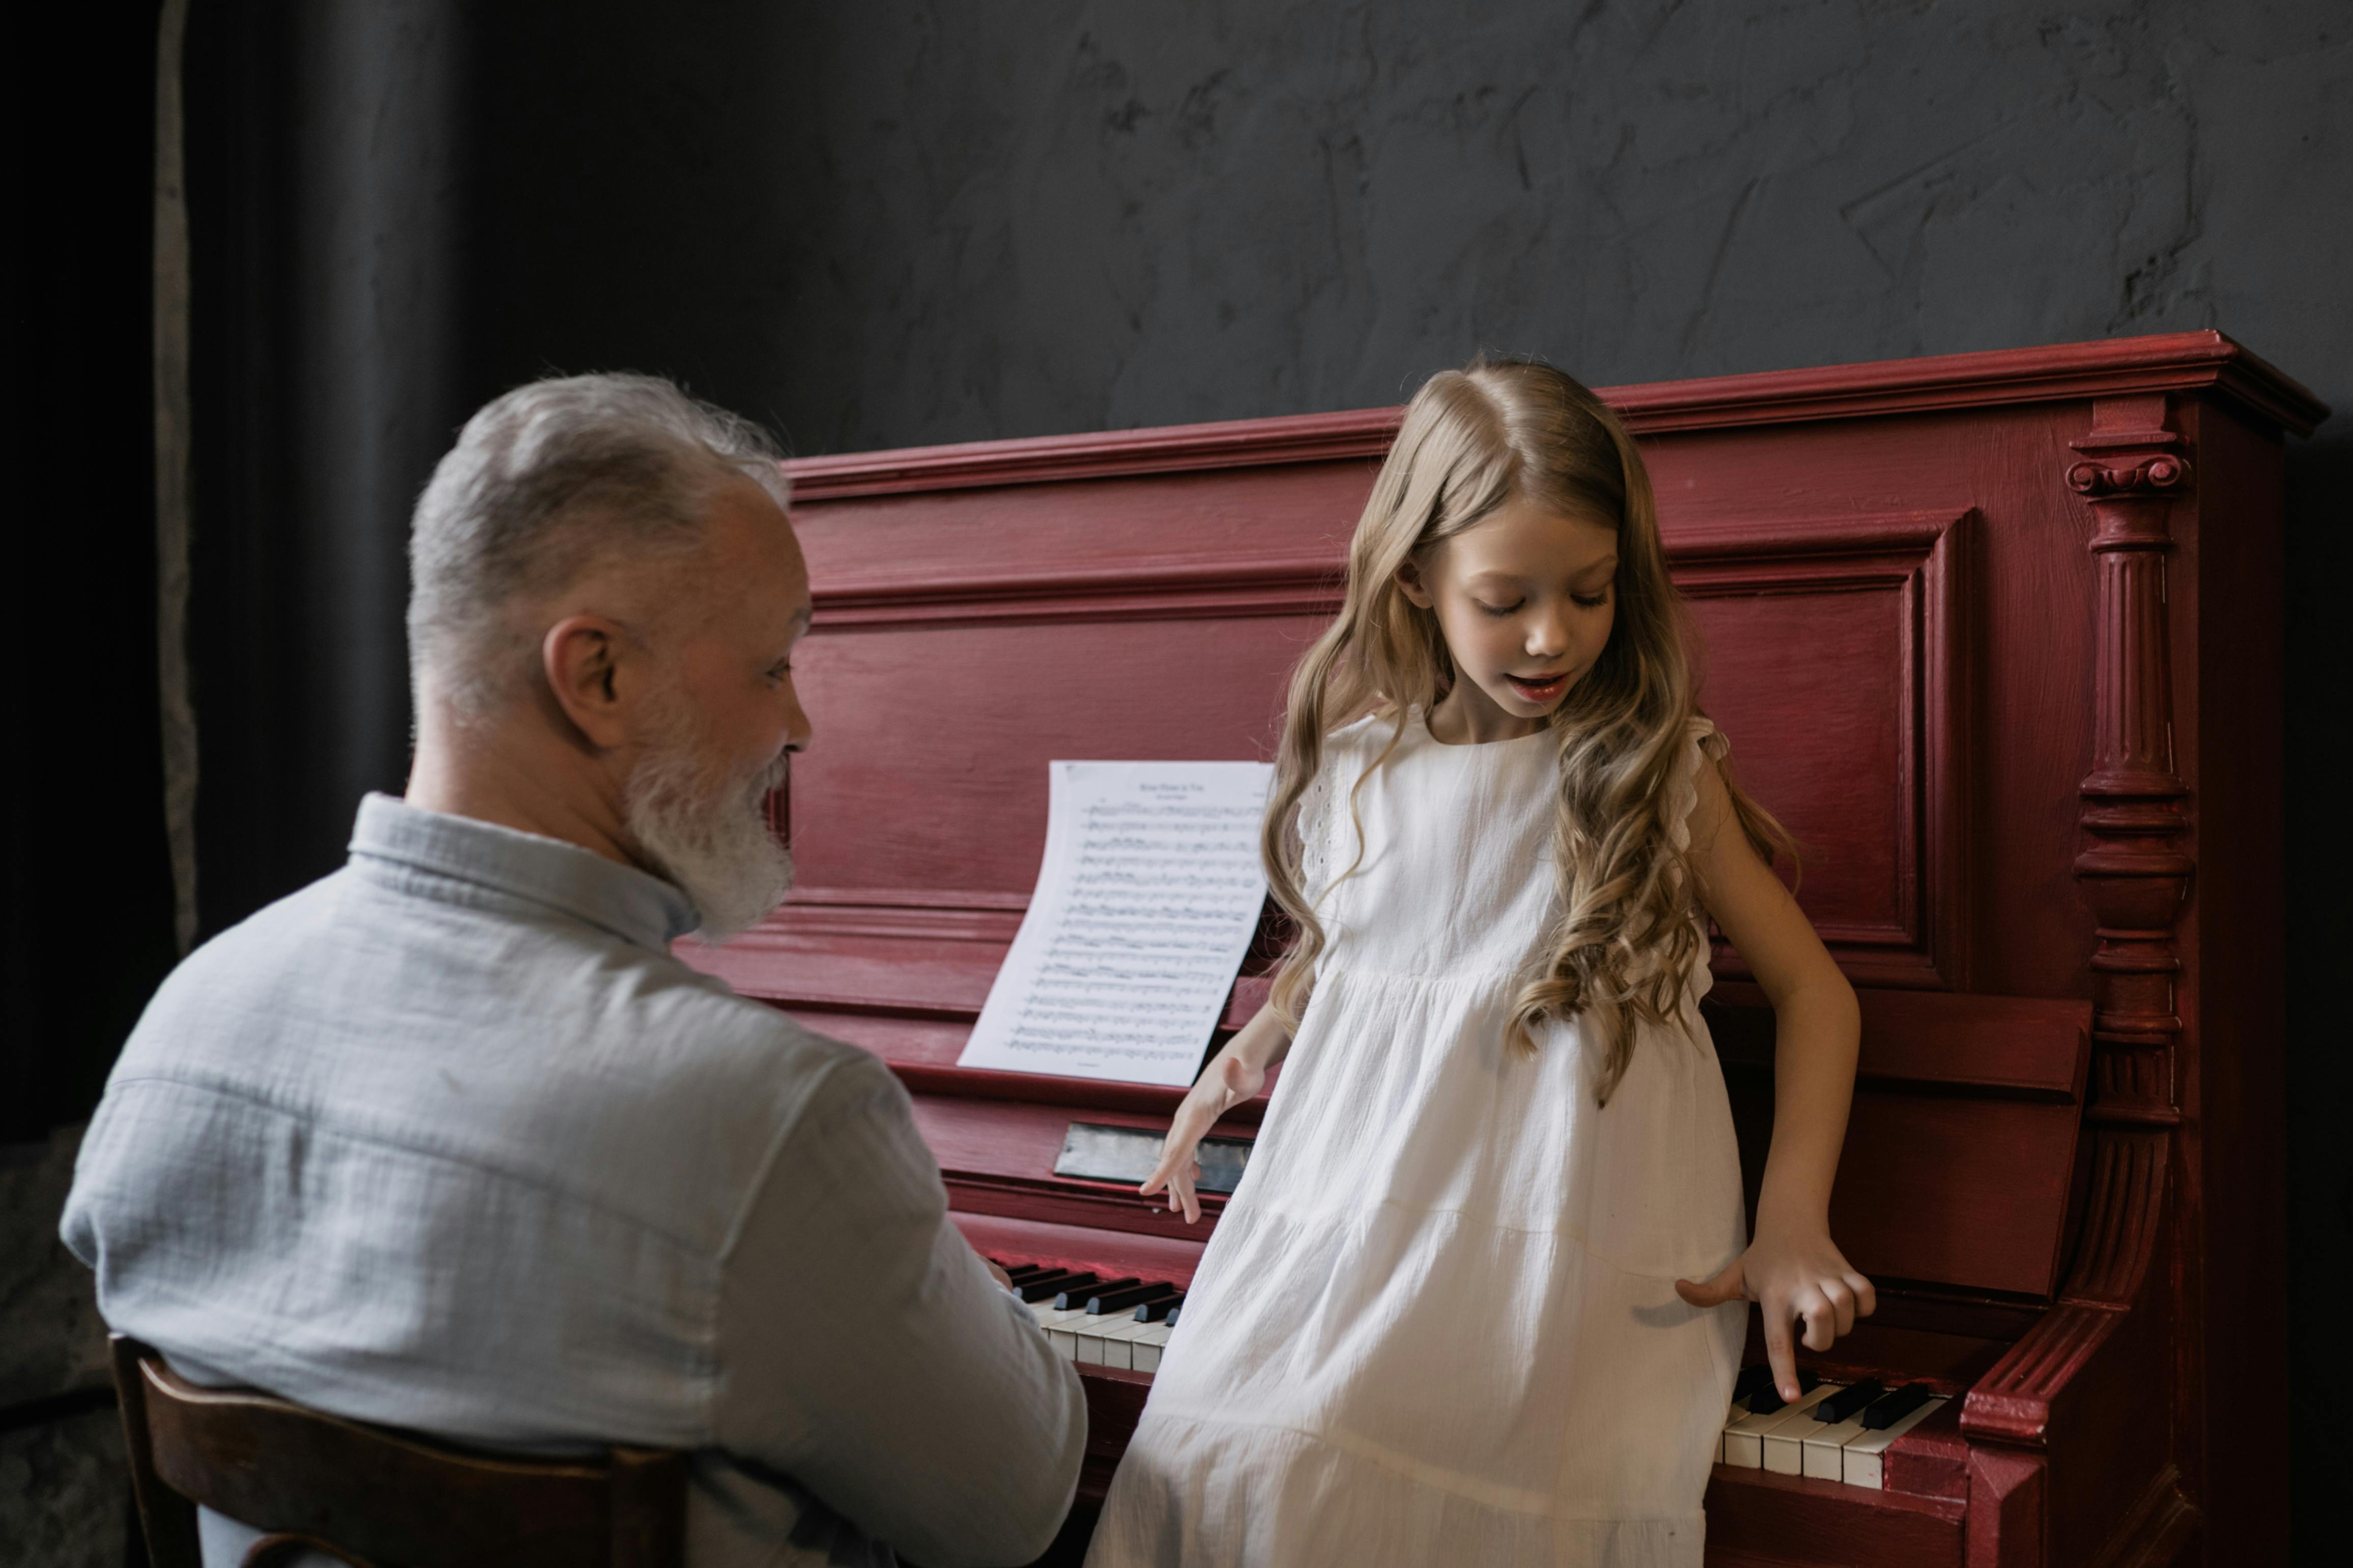 A little girl bonding with her grandfather | Source: Pexels